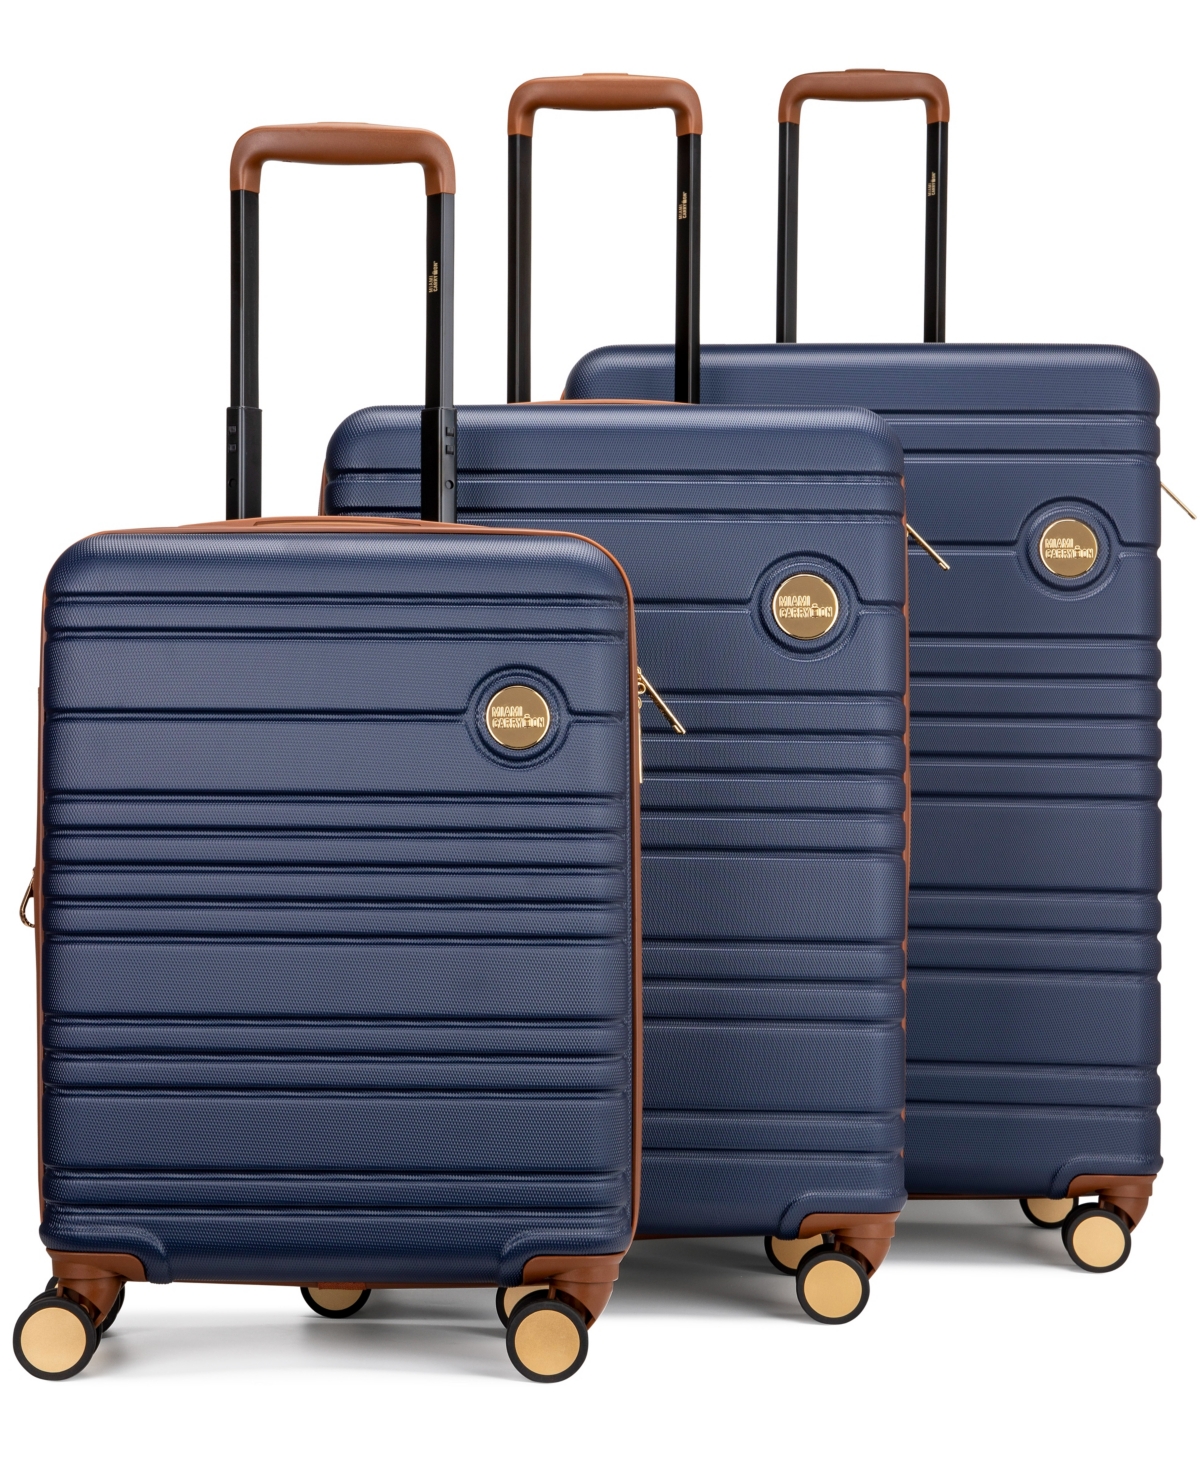 Brickell 3 Piece Expandable Retro Spinner Luggage Set - Navy